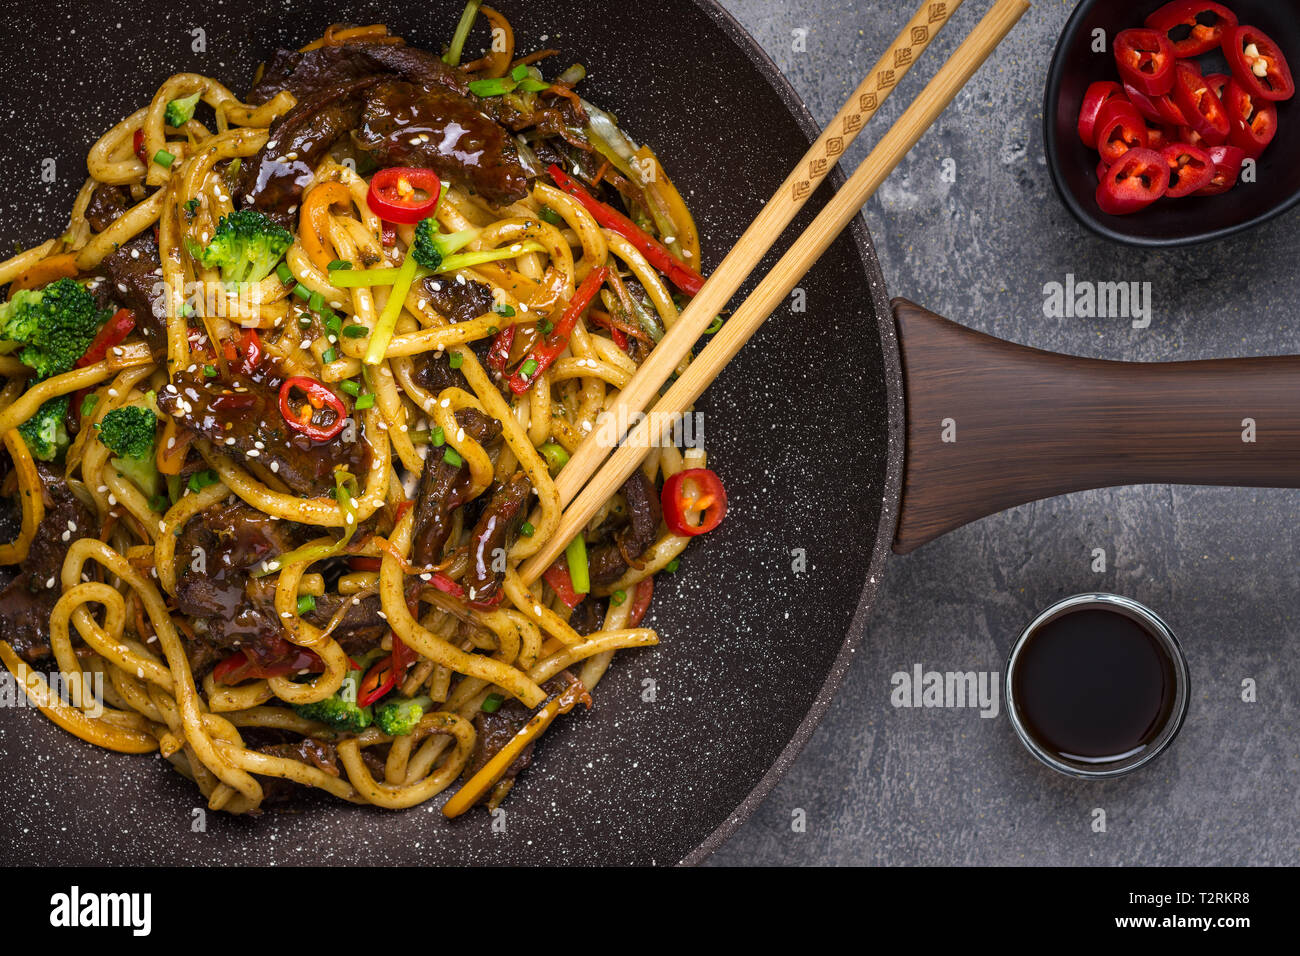 Udon Stir-Fry Noodles with Beef and Vegetables in Wok Pan on Dark  Background Stock Photo - Alamy